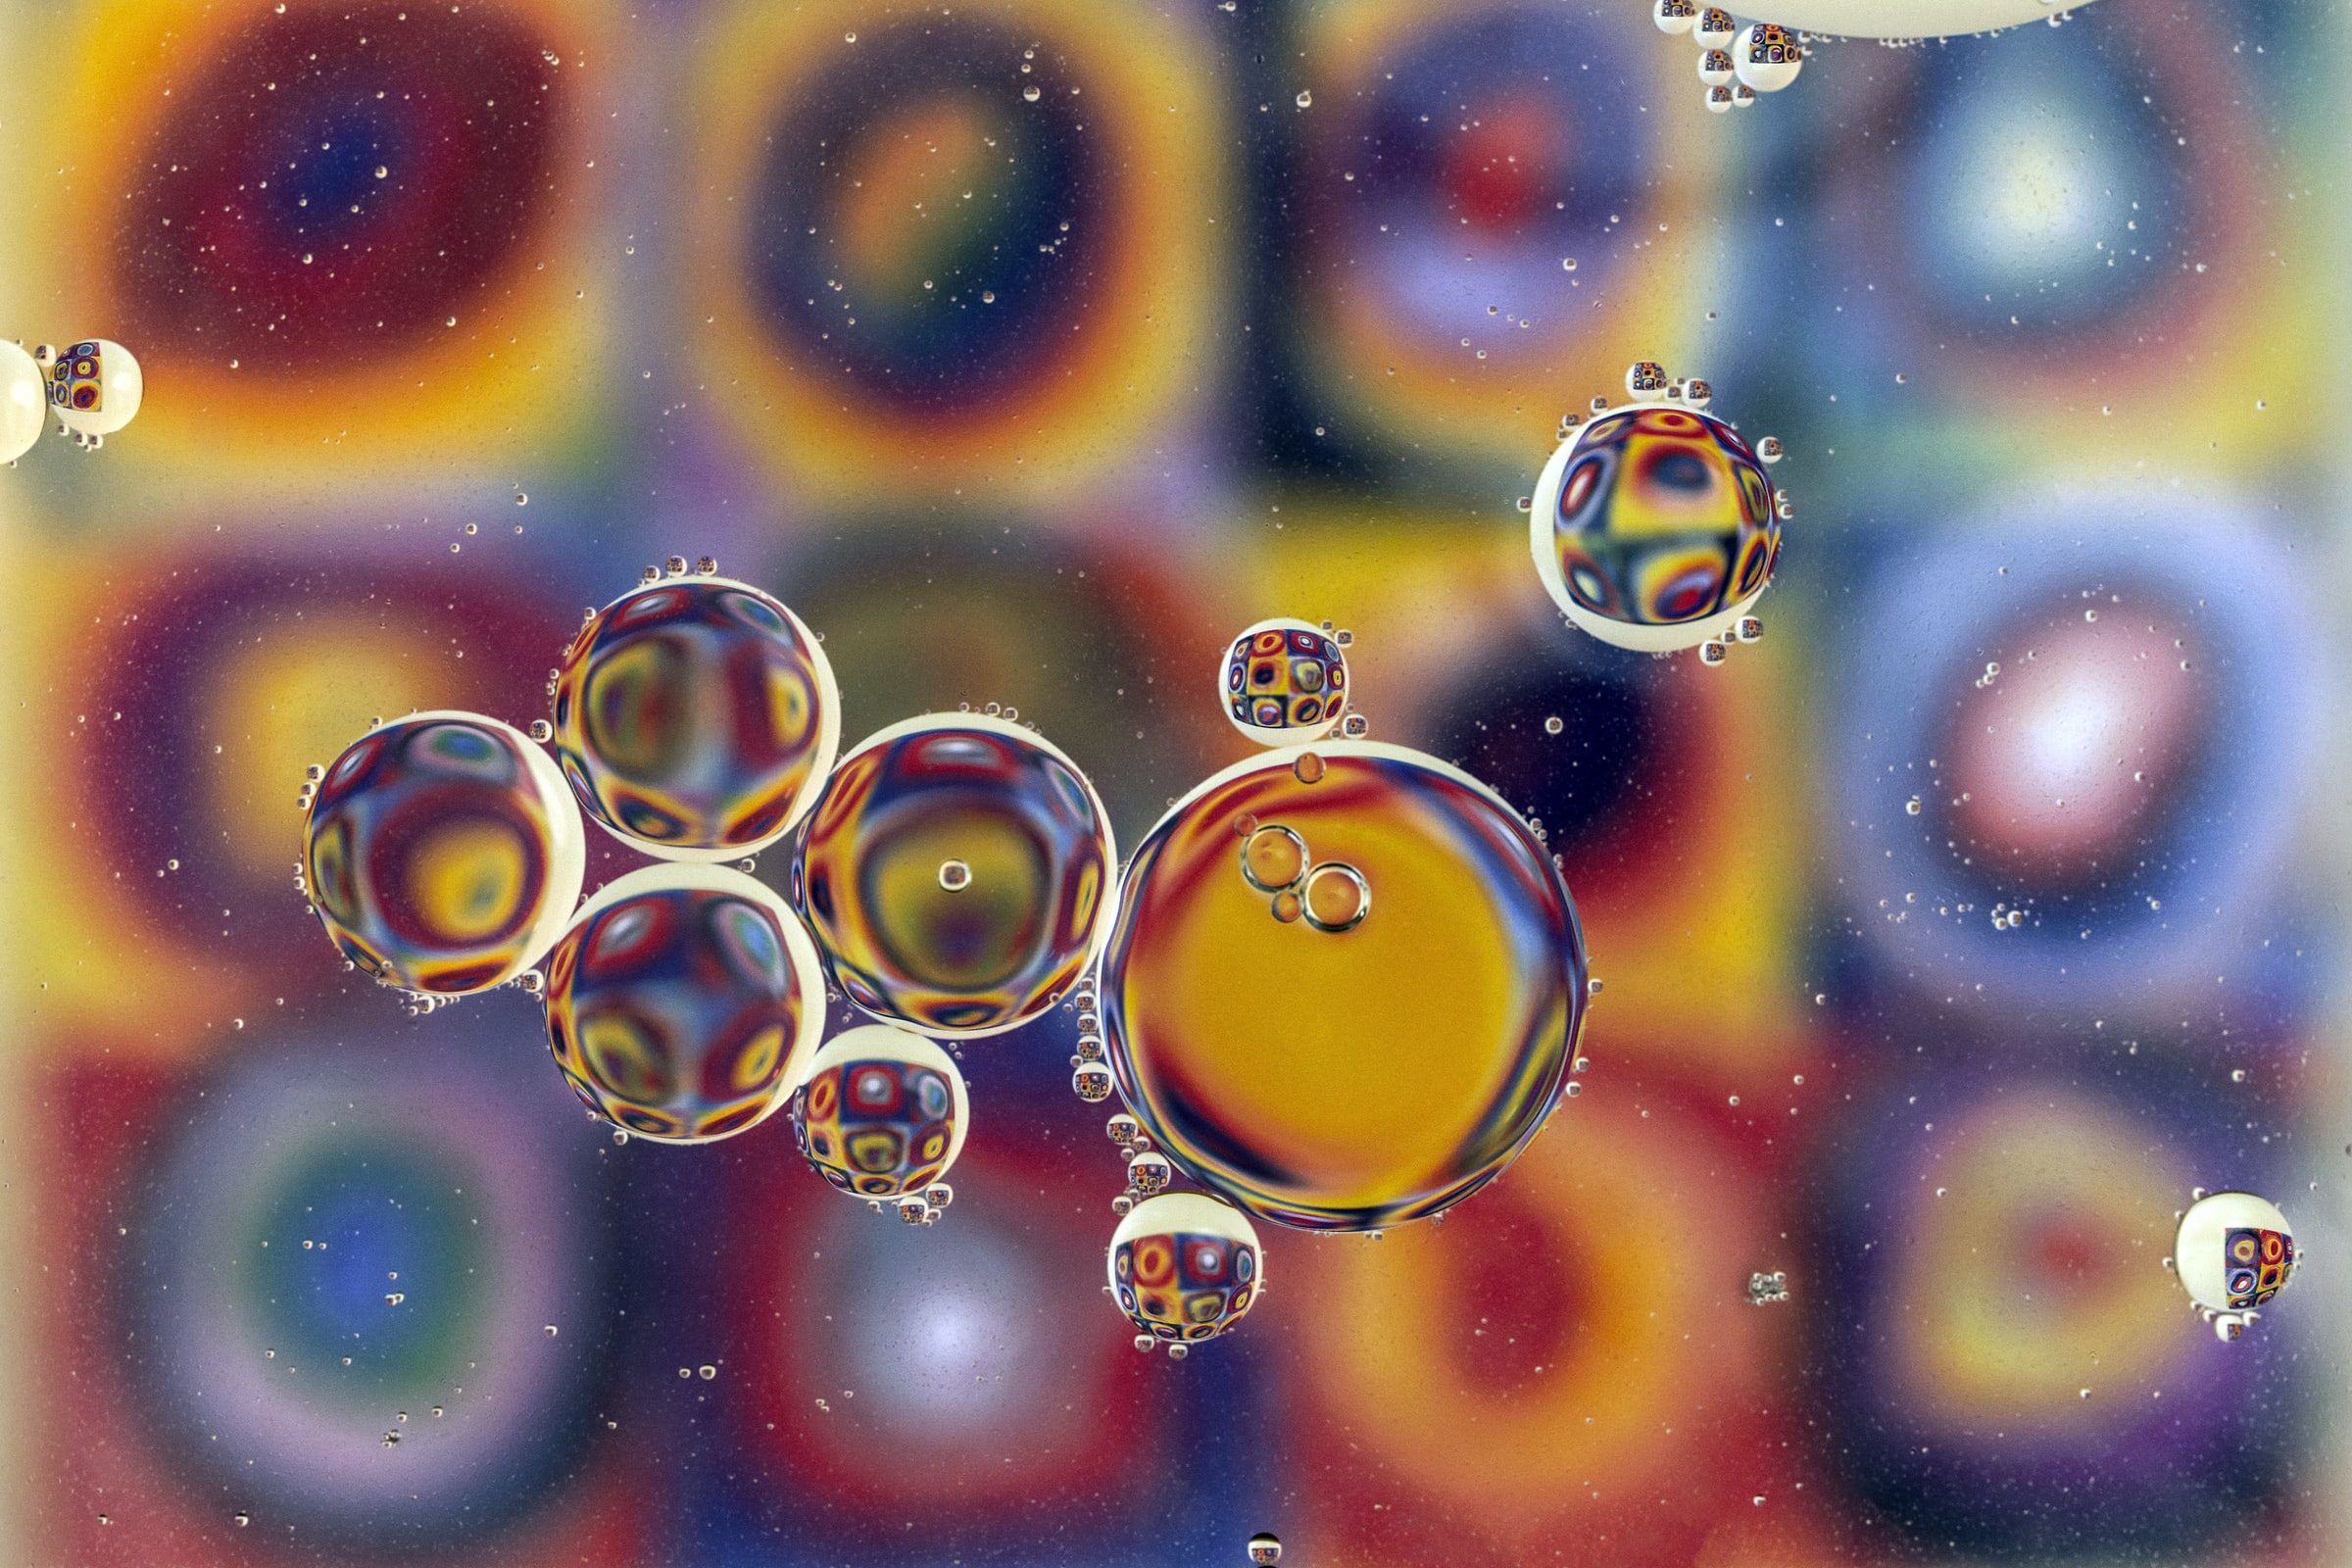 Kandinsky picture with bubbles in front - looks like it is underwater